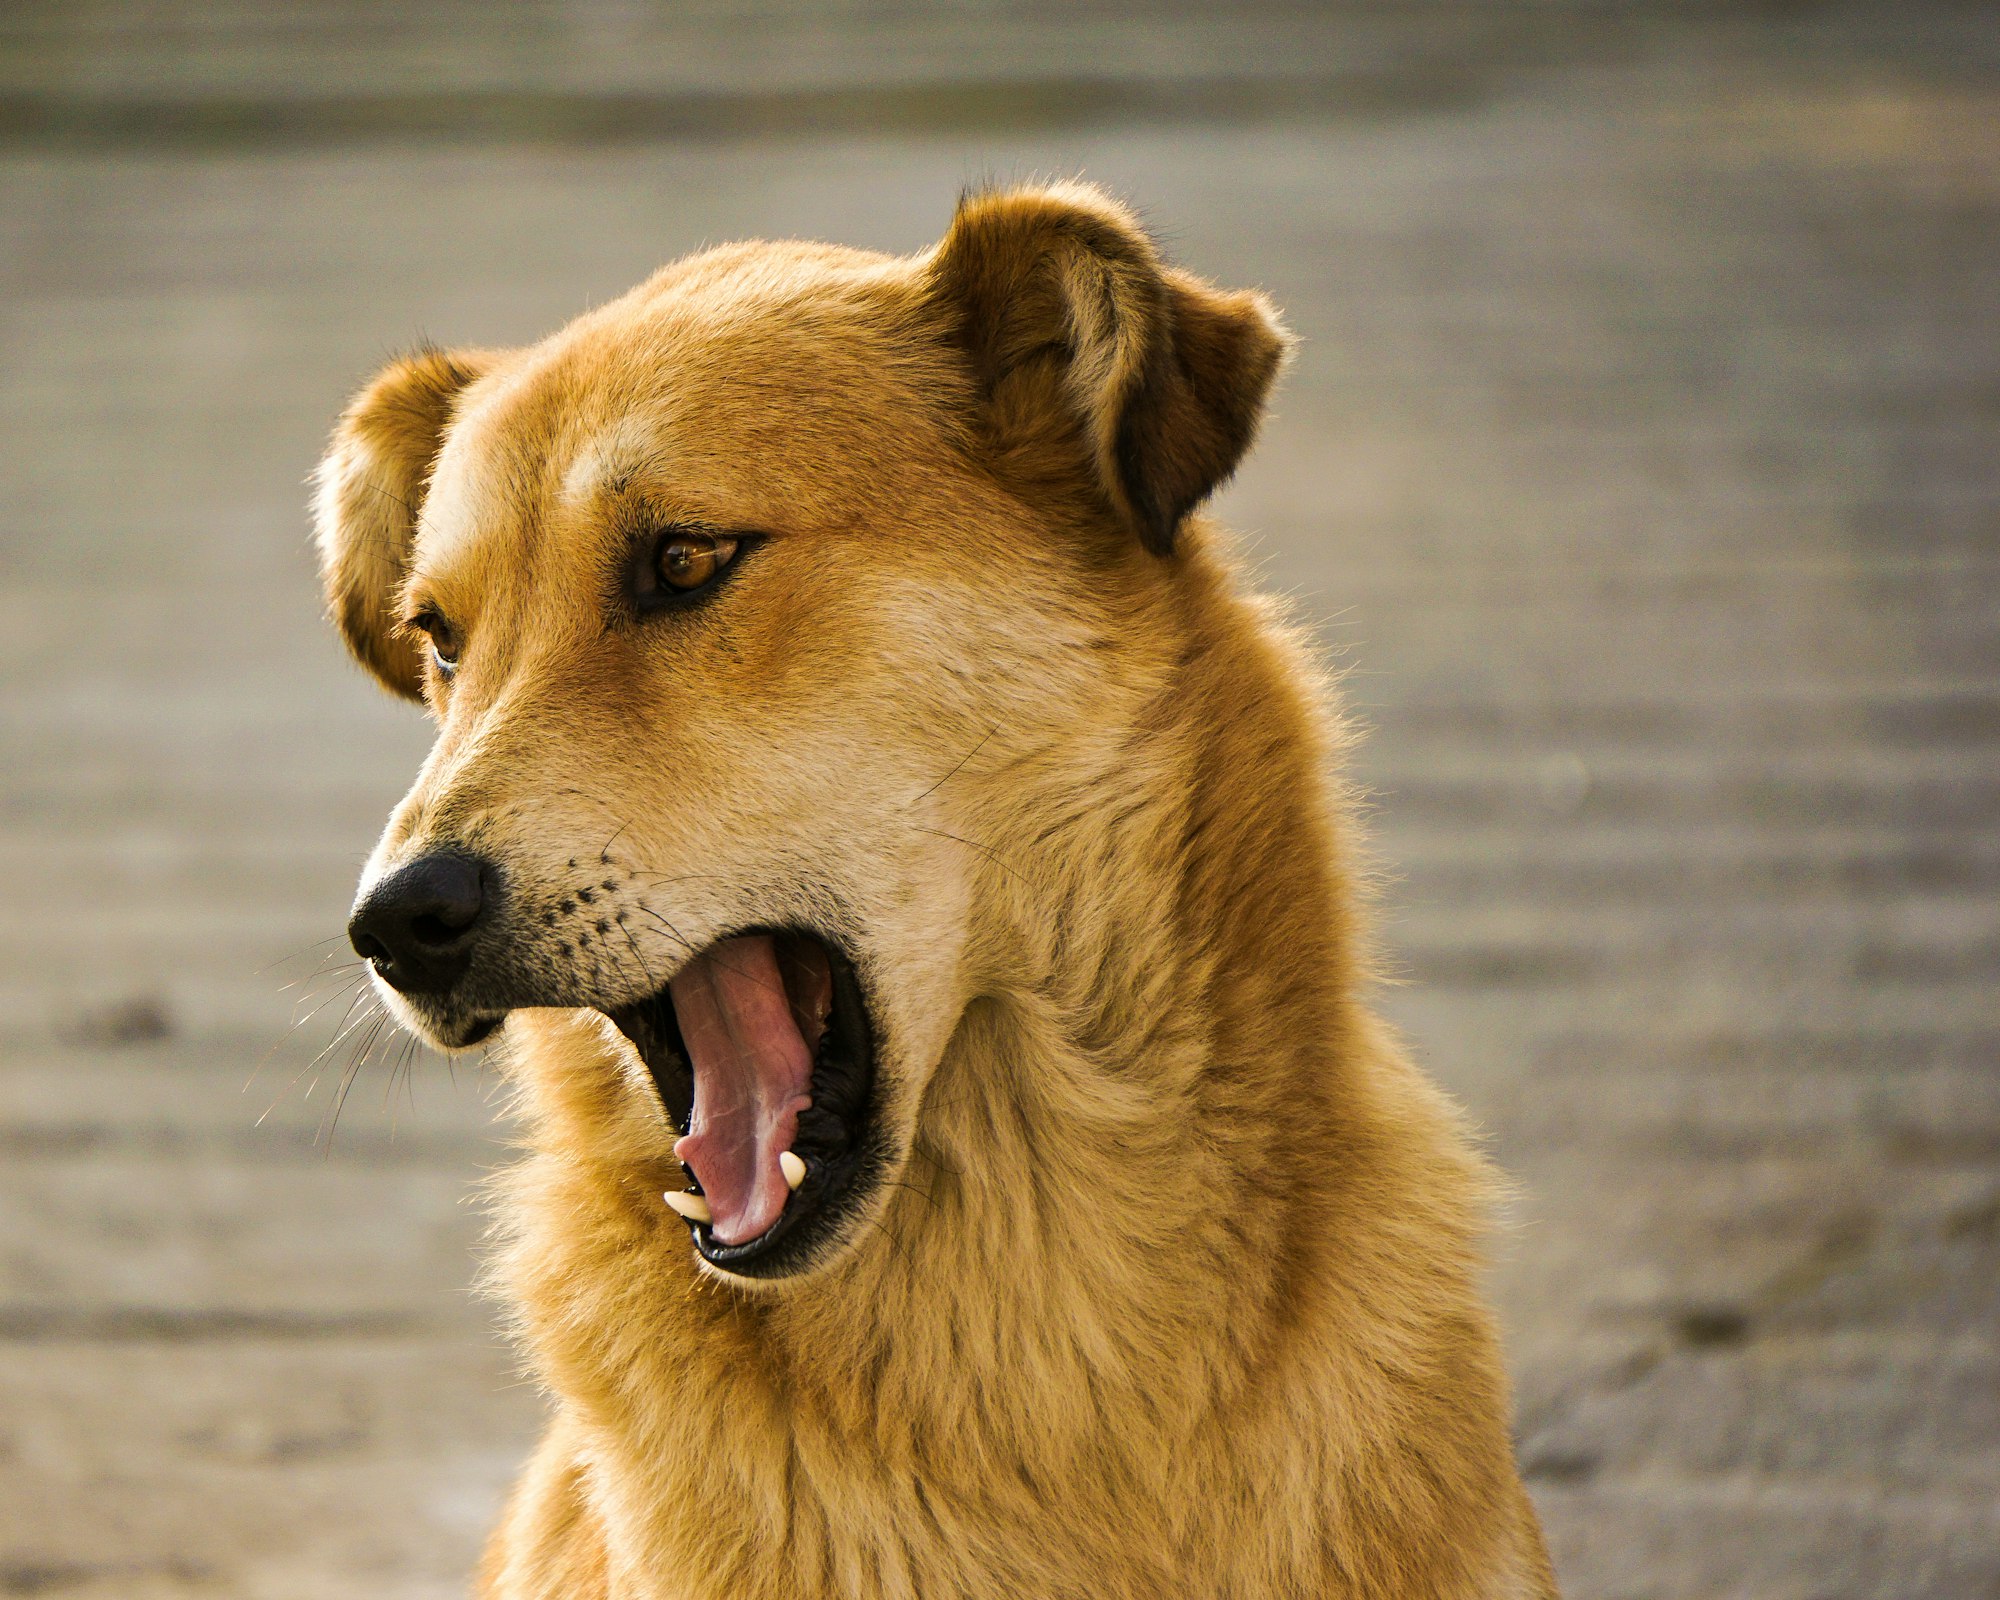 Stressed dog yawning as a sign of anxiety, showing teeth and tongue in a domestic setting